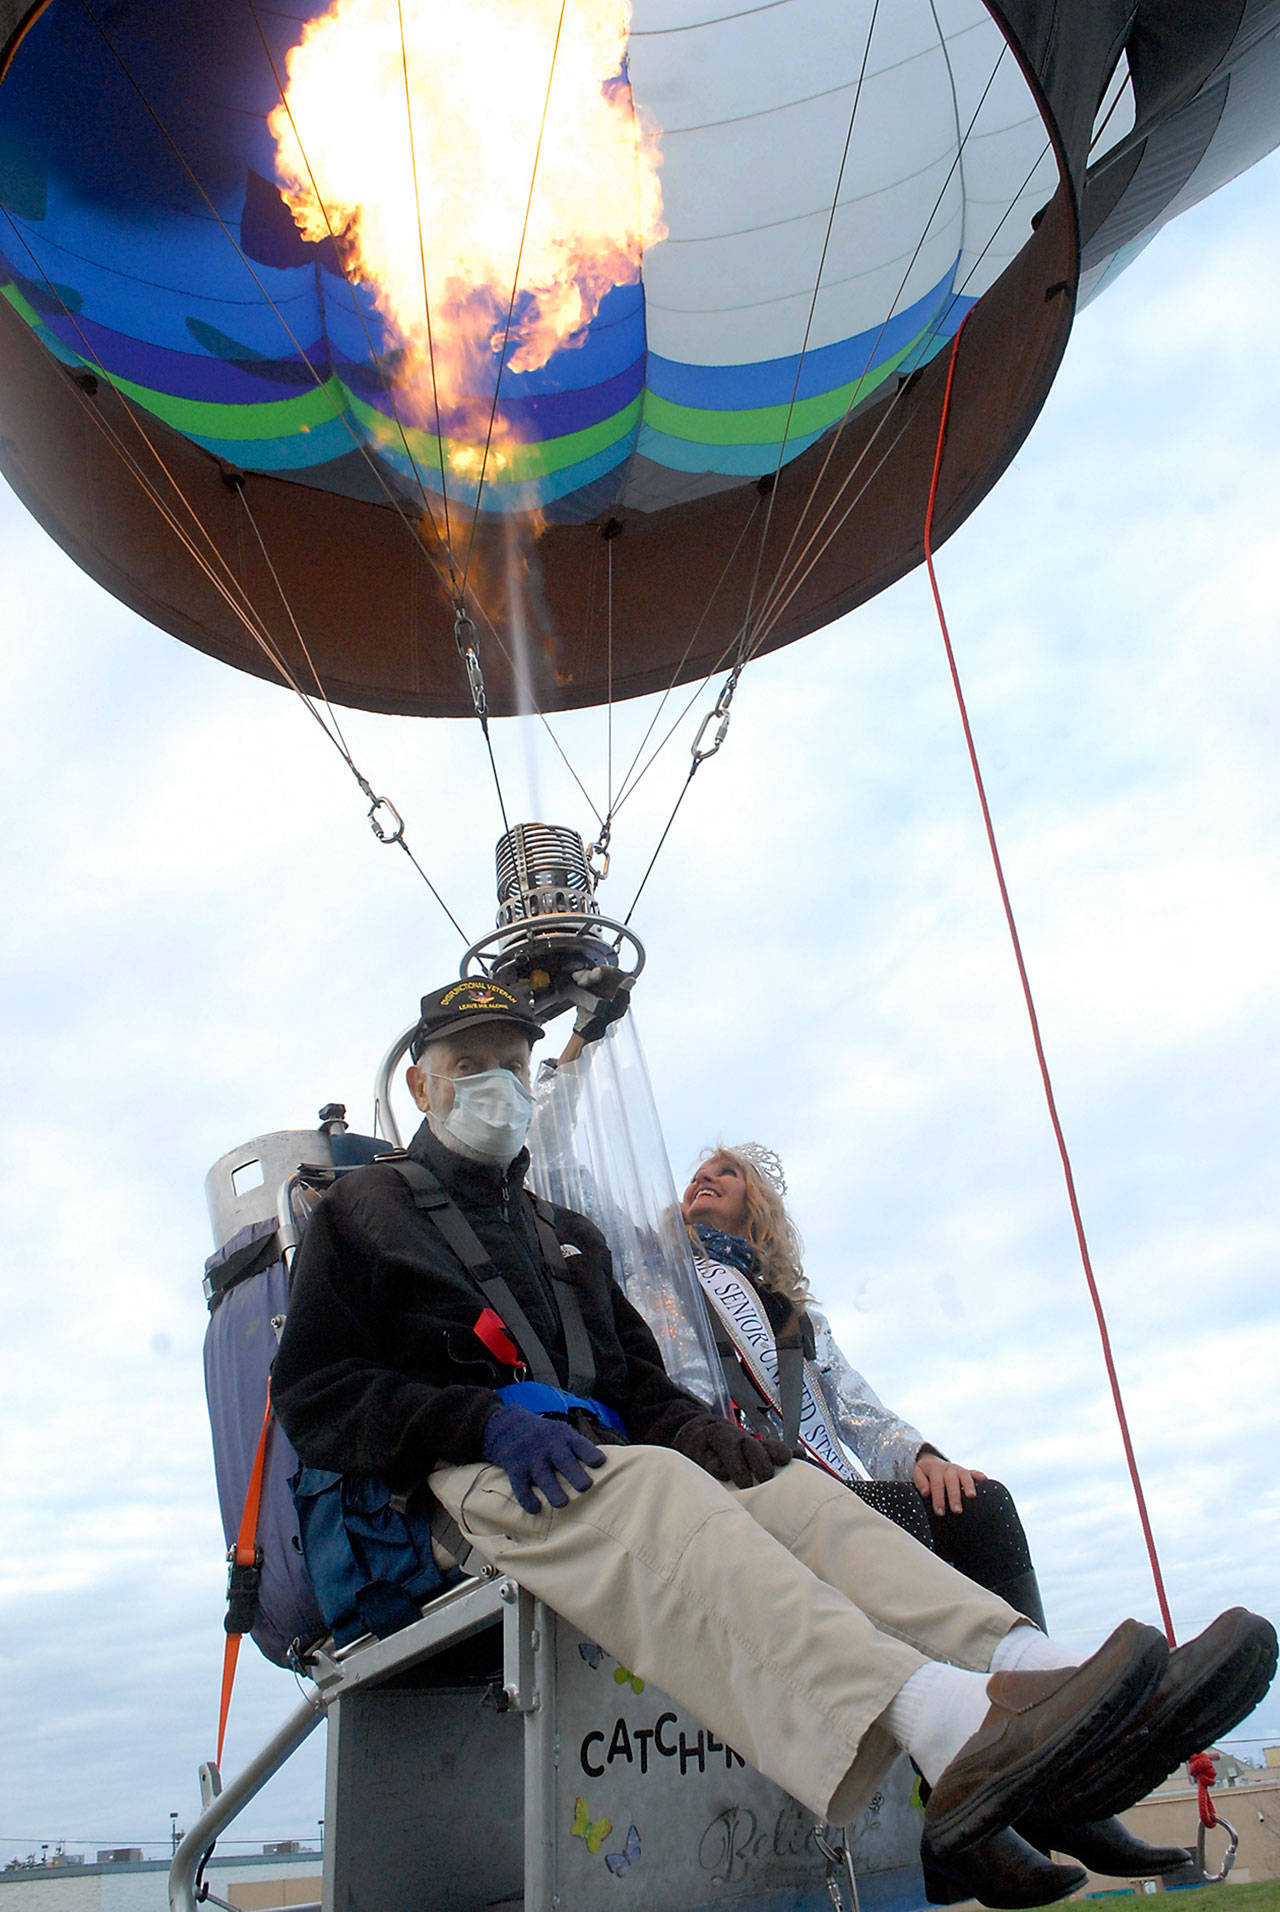 U.S. Navy veteran Lt. Cmdr. Frank Hurlbut, 92, takes a tethered balloon ride with Capt. Crystal Stout of the Dream Catcher Balloon Program on Veterans Day, Wednesday, Nov. 11. Hurlbut, a Navy pilot during his time of service, was one of several Sinclair Place assisted living community residents who were offered the opportunity to take rides to enjoy the view. Photo by Keith Thorpe/Olympic Peninsula News Group